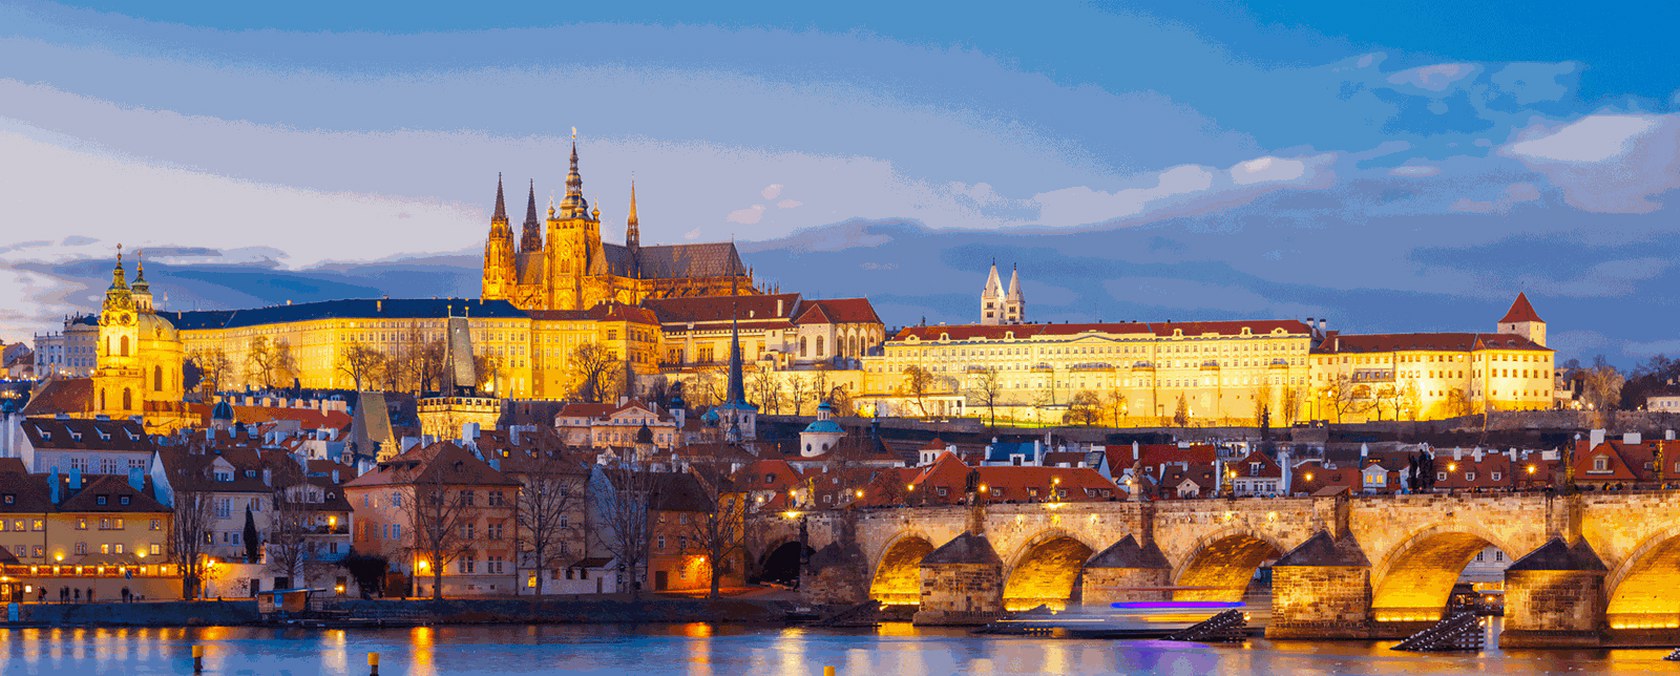 Prague’s architectural, cultural, and natural heritage